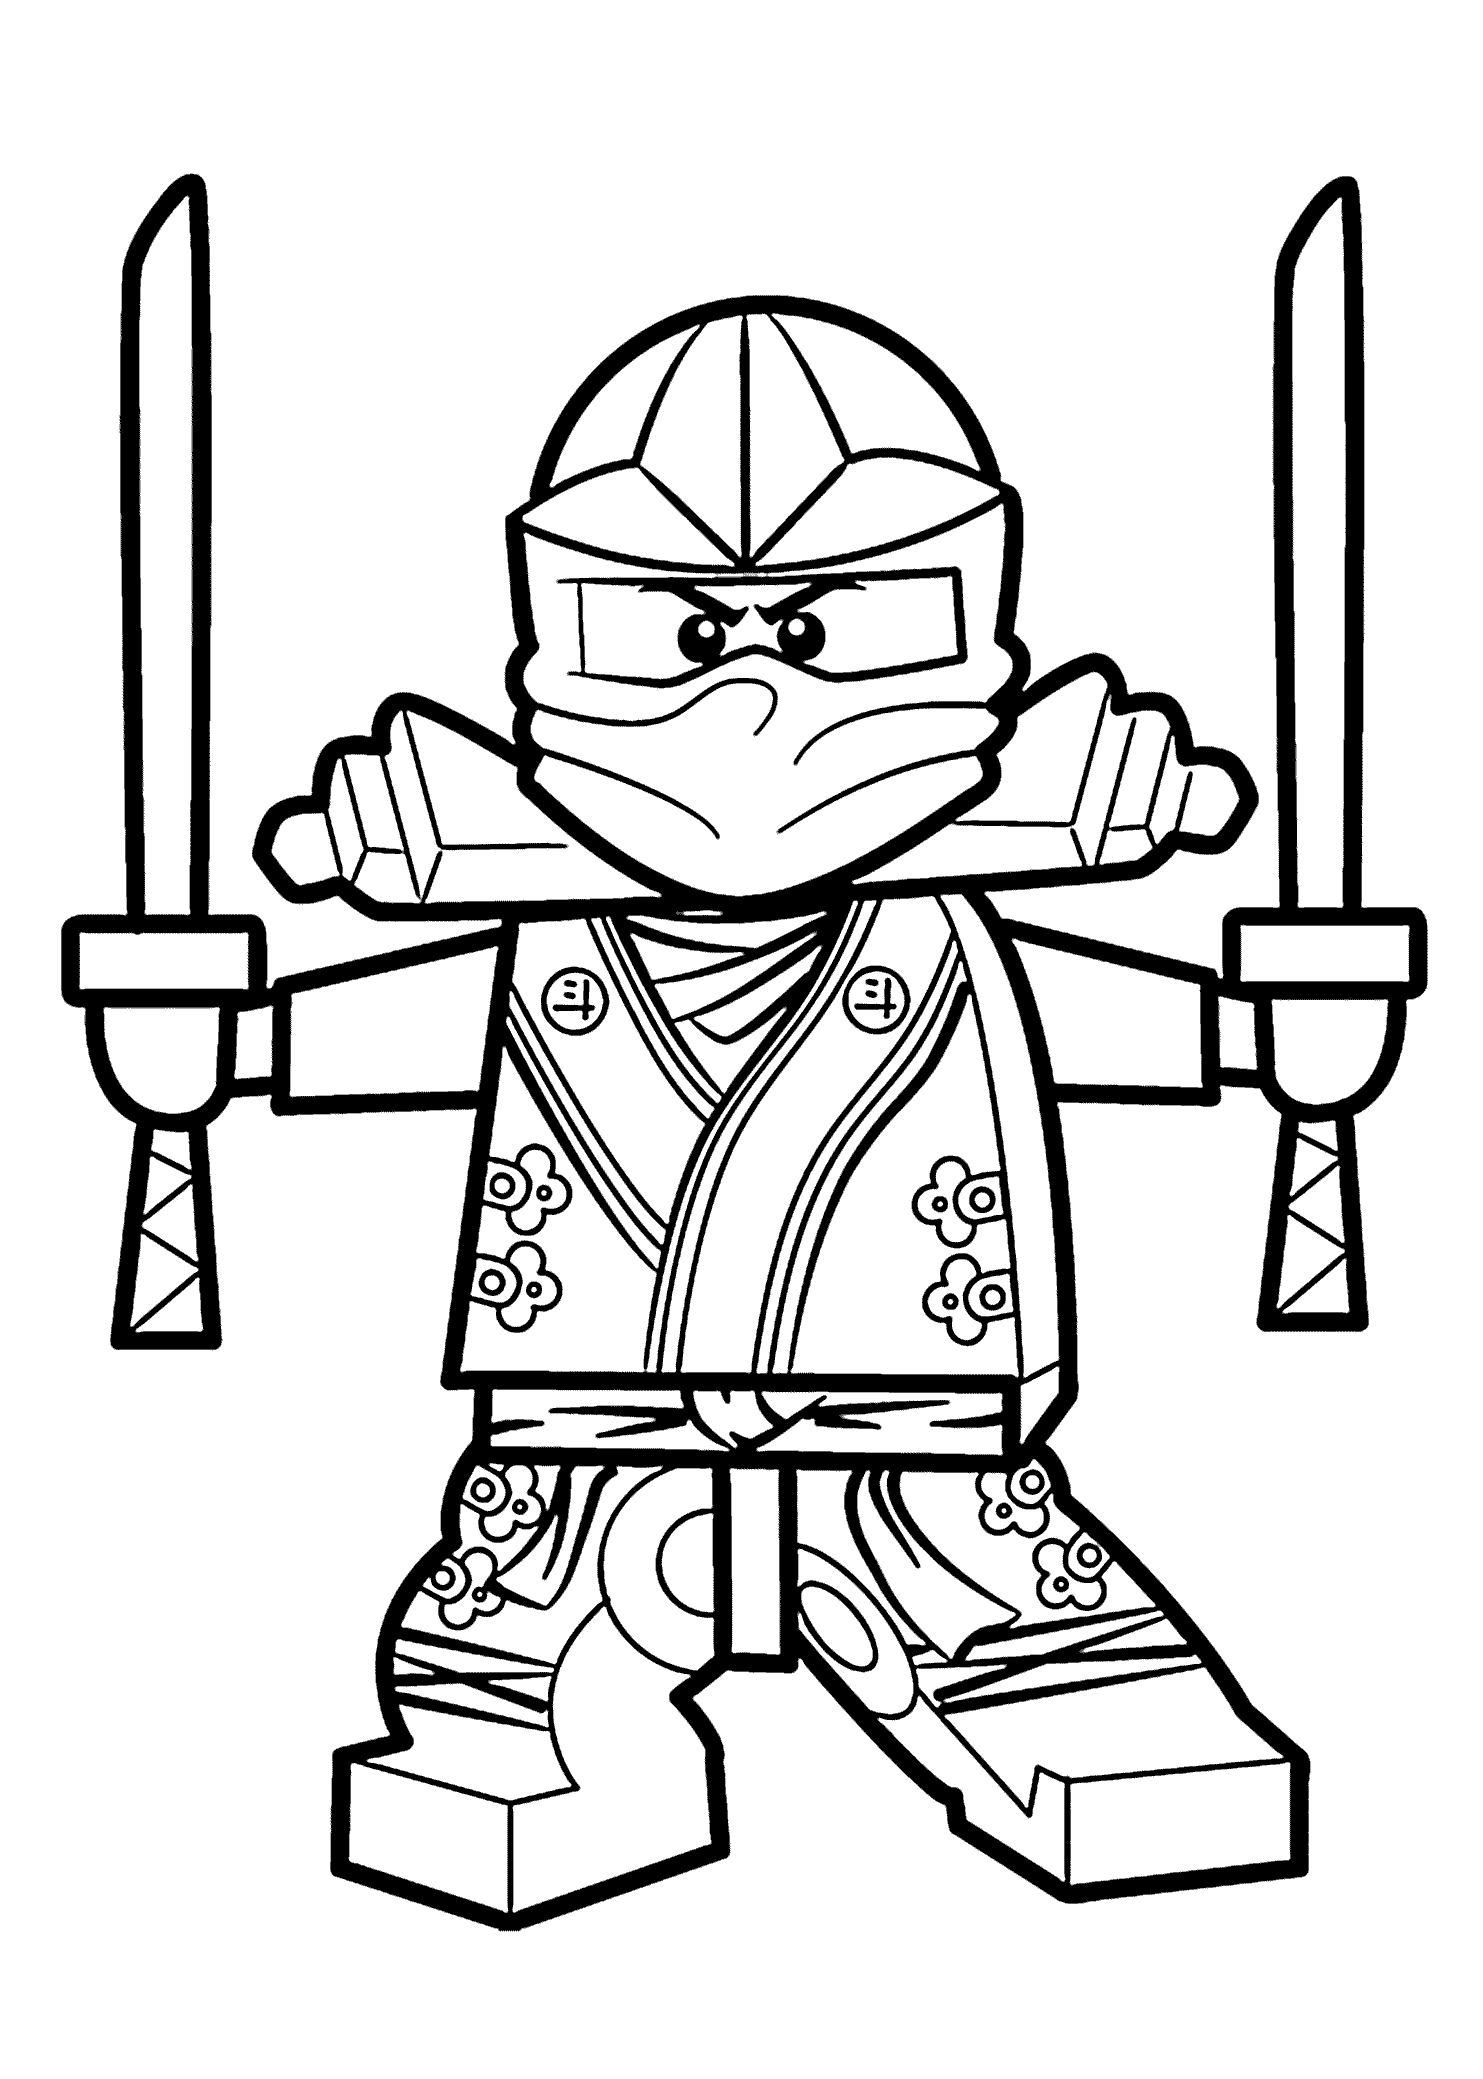 Green Ninja coloring pages for kids, printable free. Lego coloring ...